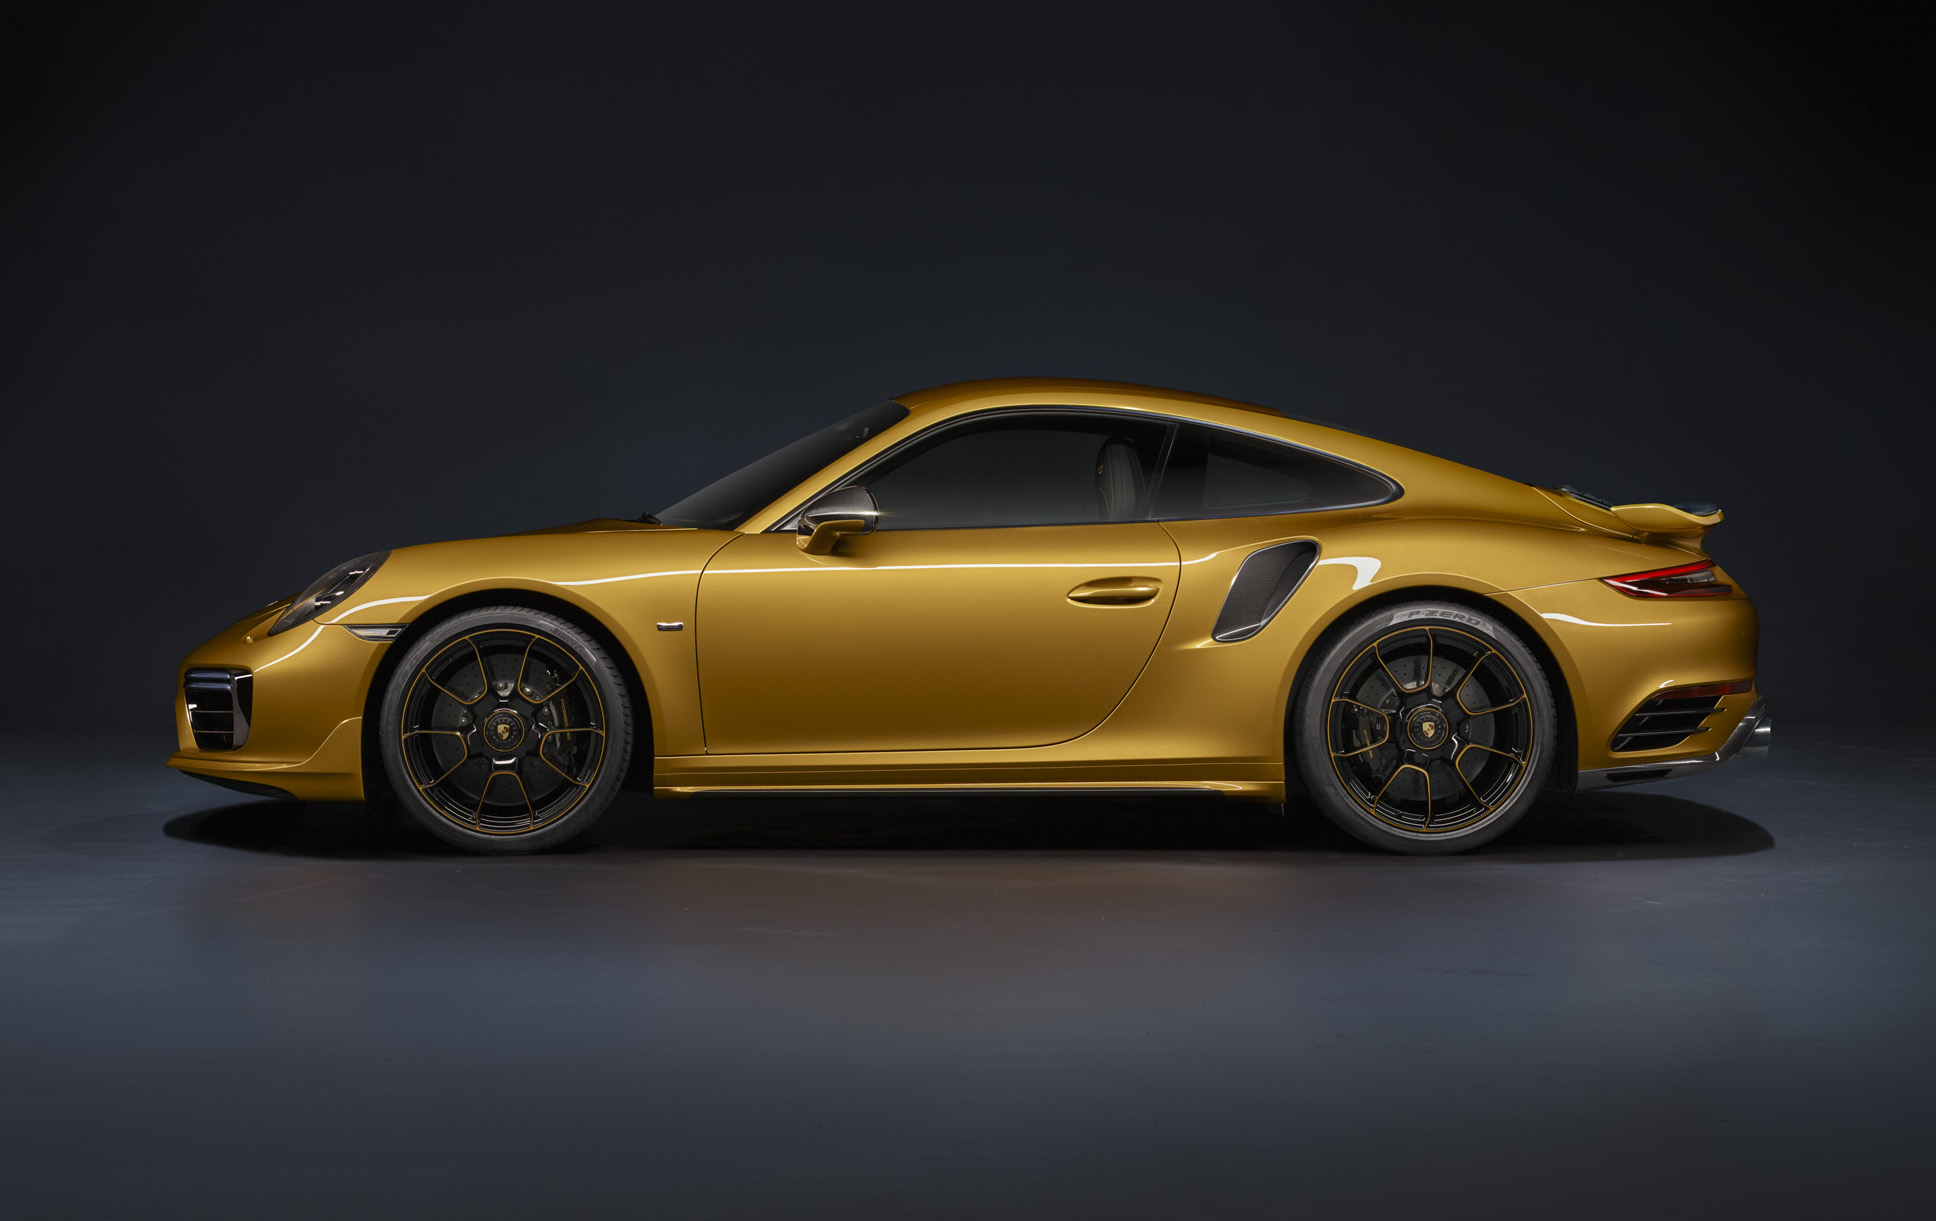 Porsche 911 Turbo S Exclusive Series revealed, most powerful 911 ever